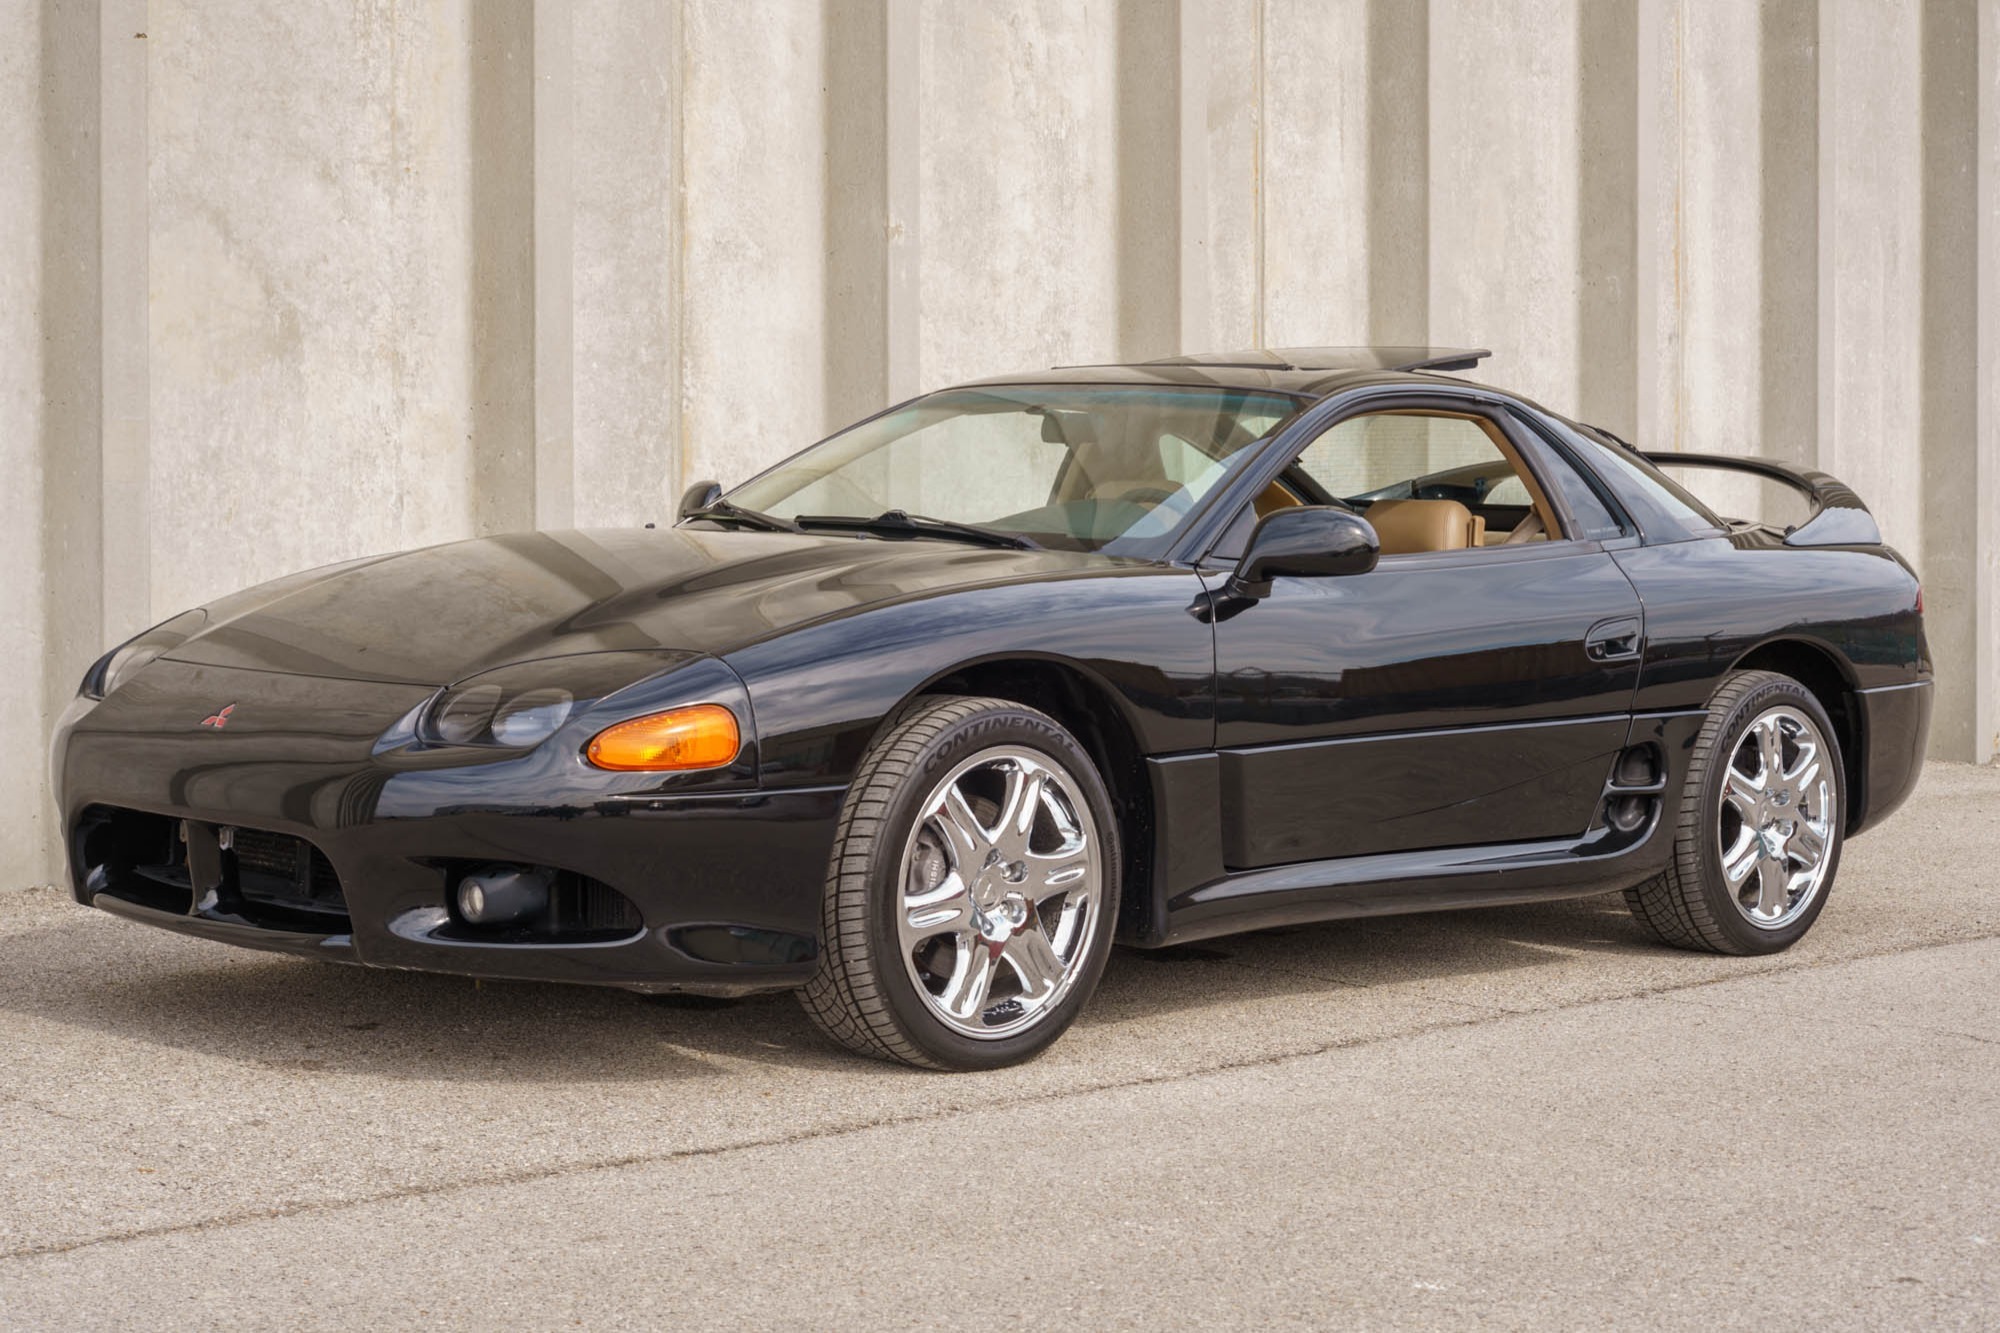 1998 Mitsubishi 3000GT VR4 6-Speed for sale on BaT Auctions - closed on  November 8, 2022 (Lot #90,058) | Bring a Trailer